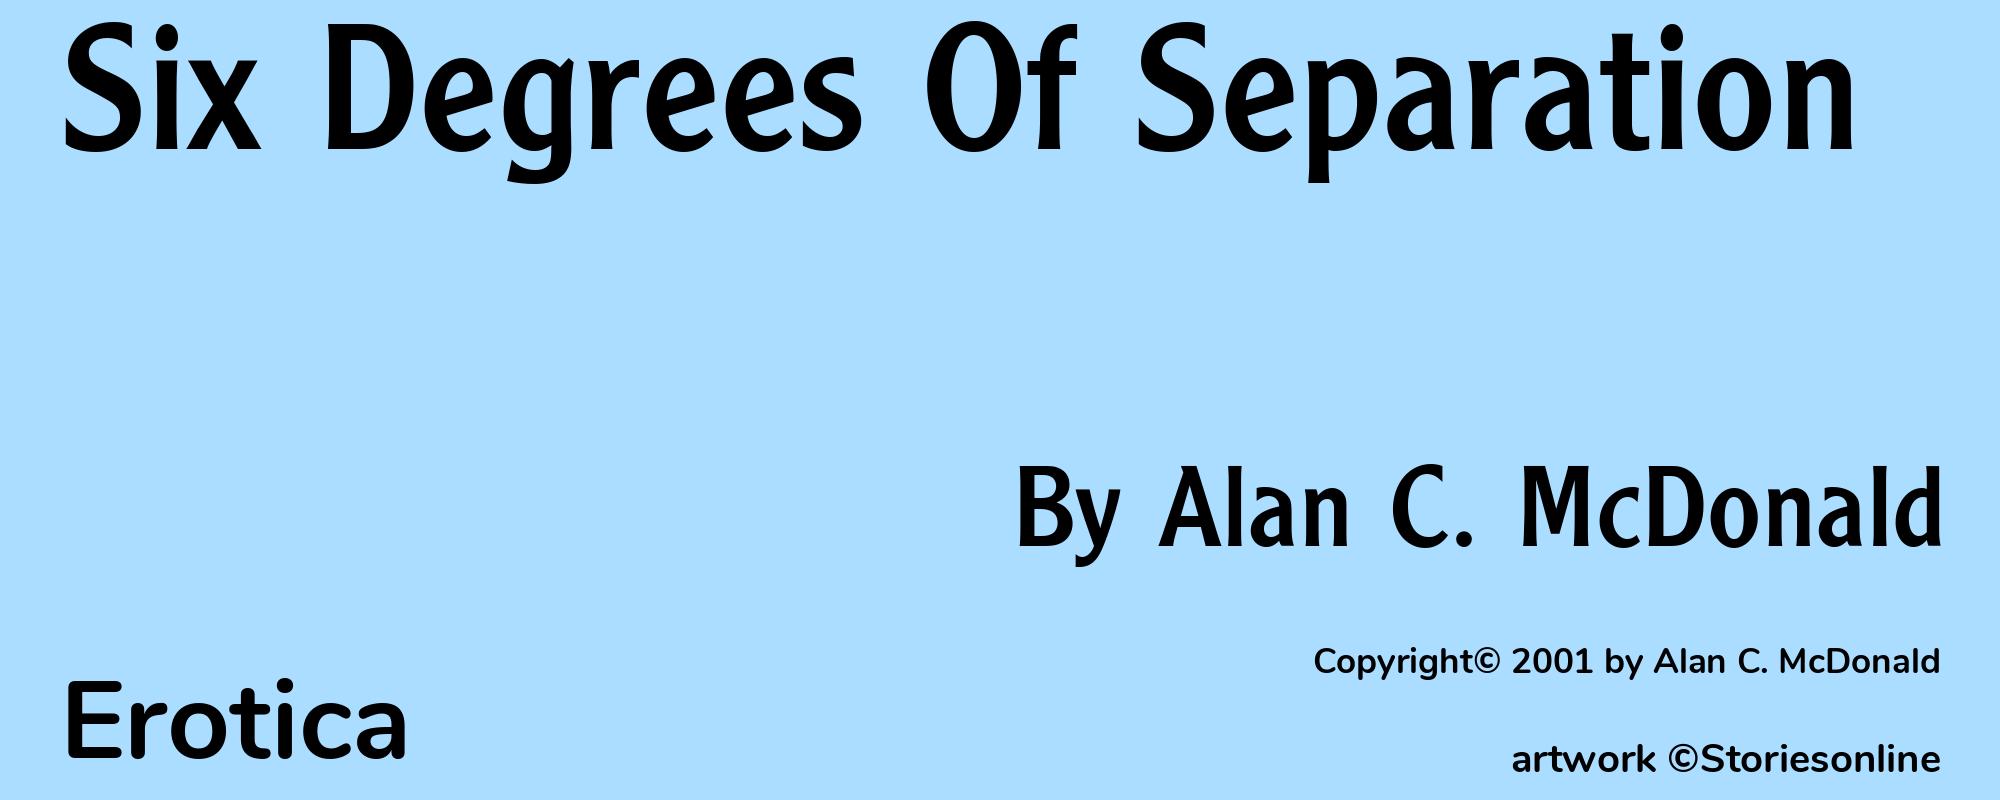 Six Degrees Of Separation - Cover